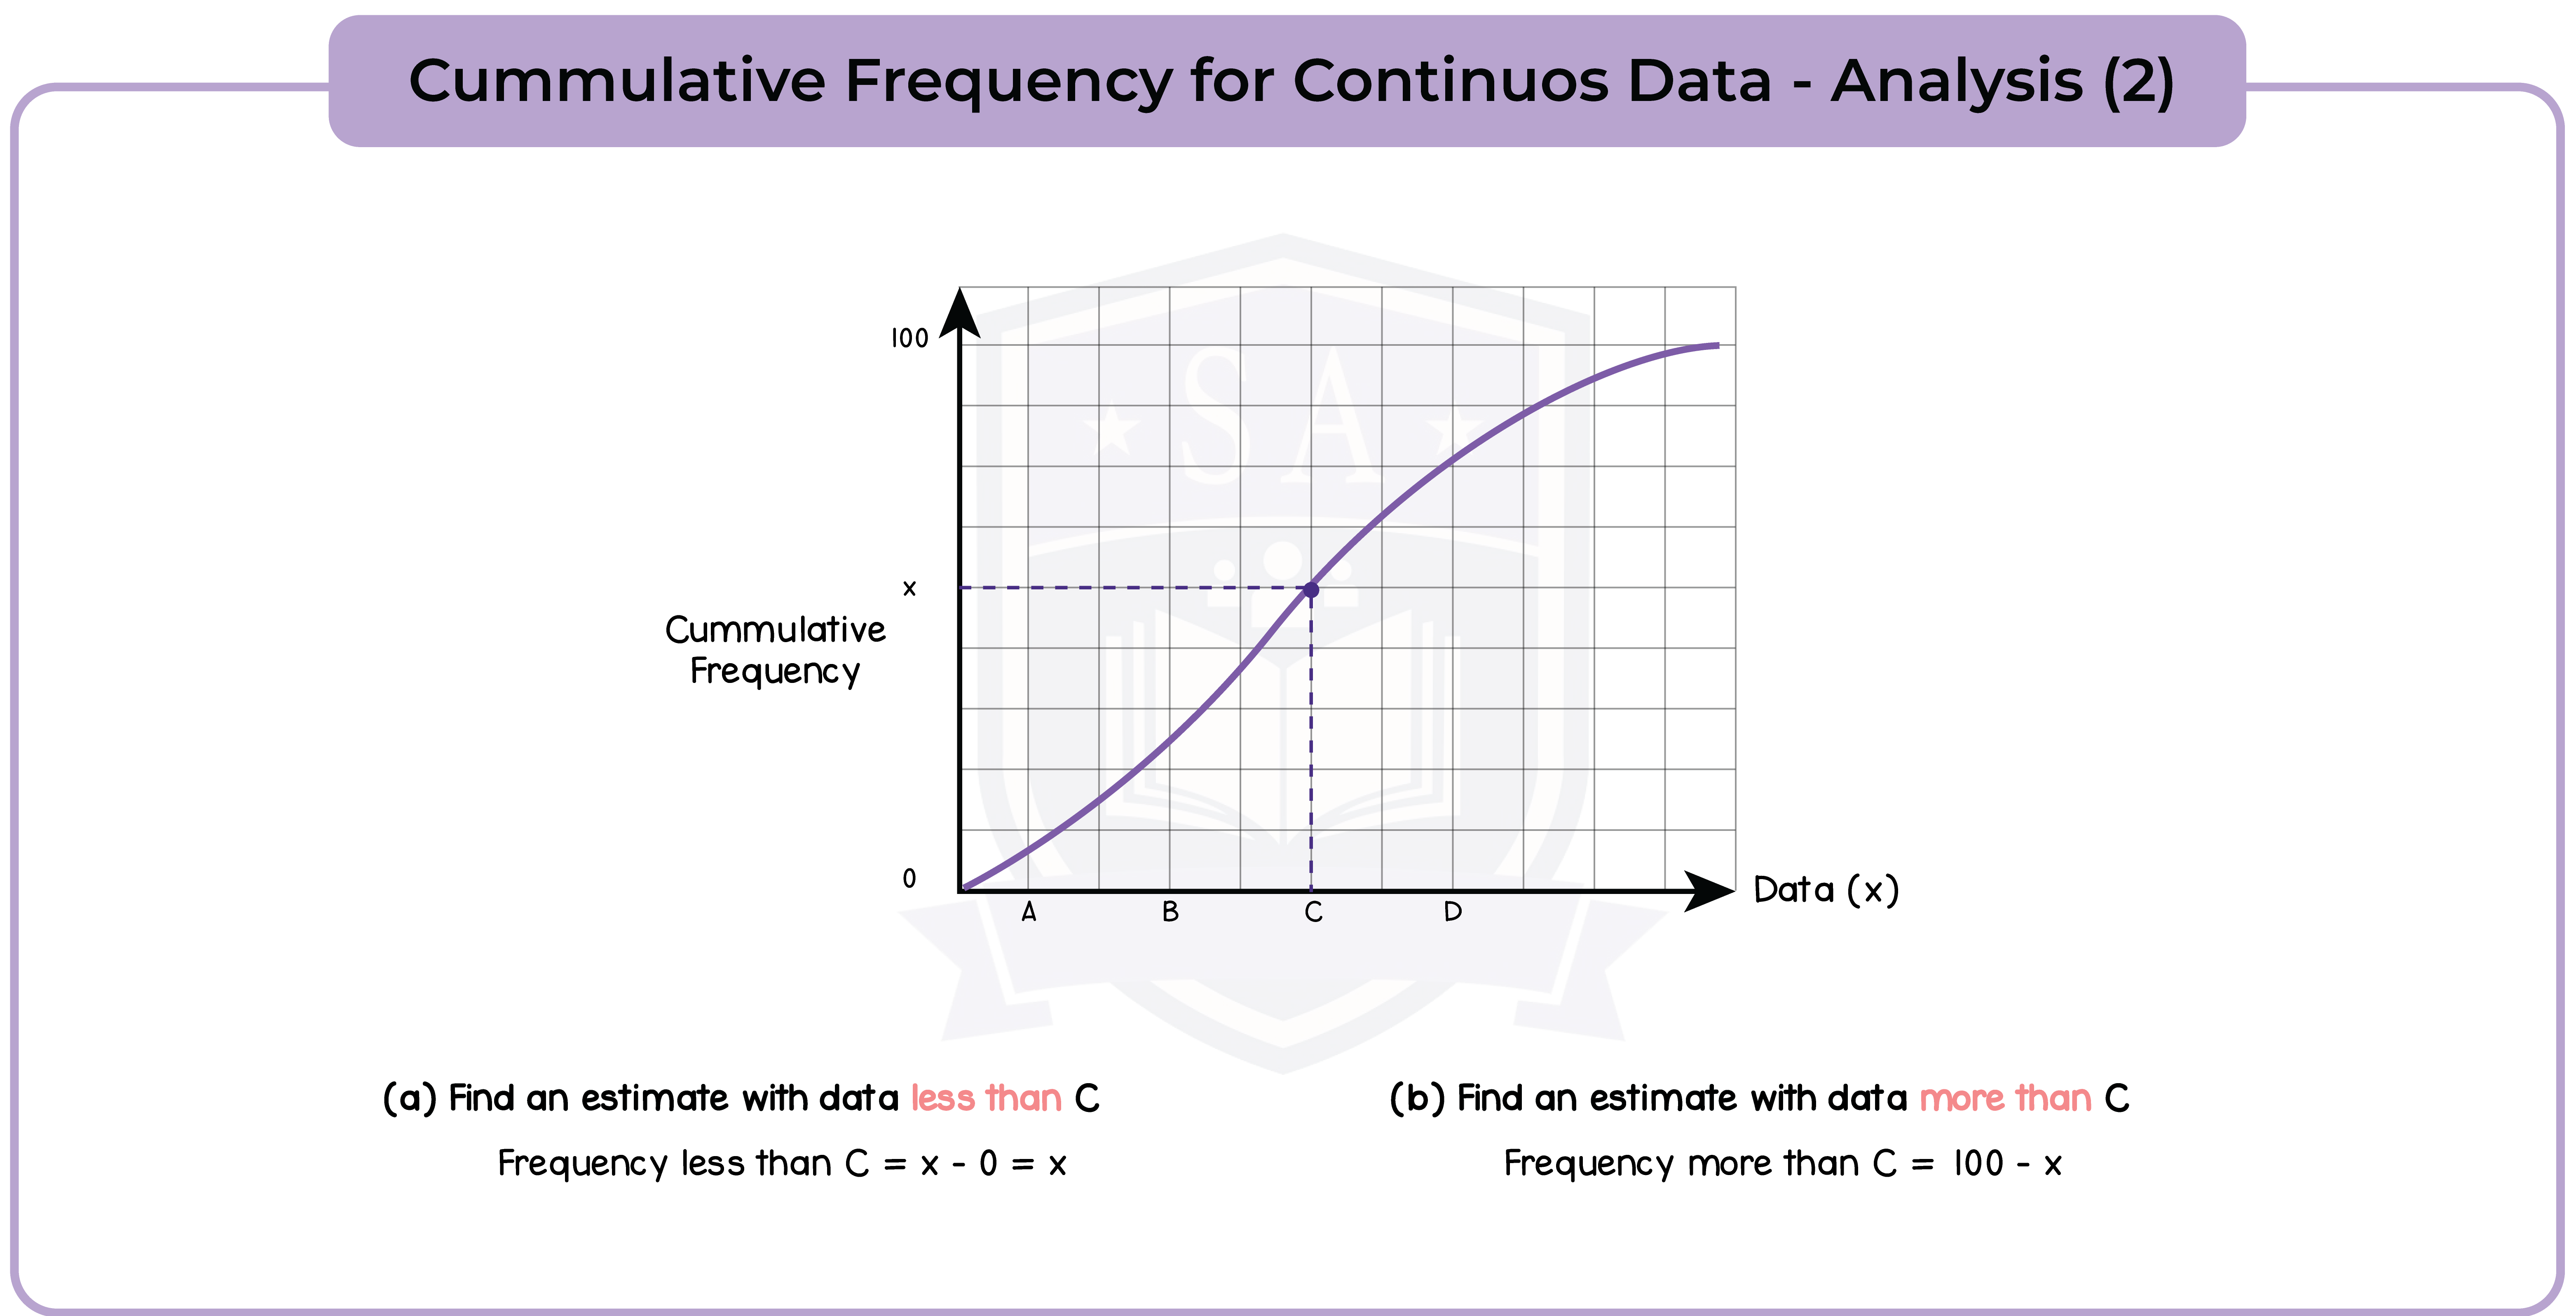 edexcel_igcse_mathematics a_topic 38_graphical representation of data_008_Cummulative Frequency for Continuous Data - Analysis (2)